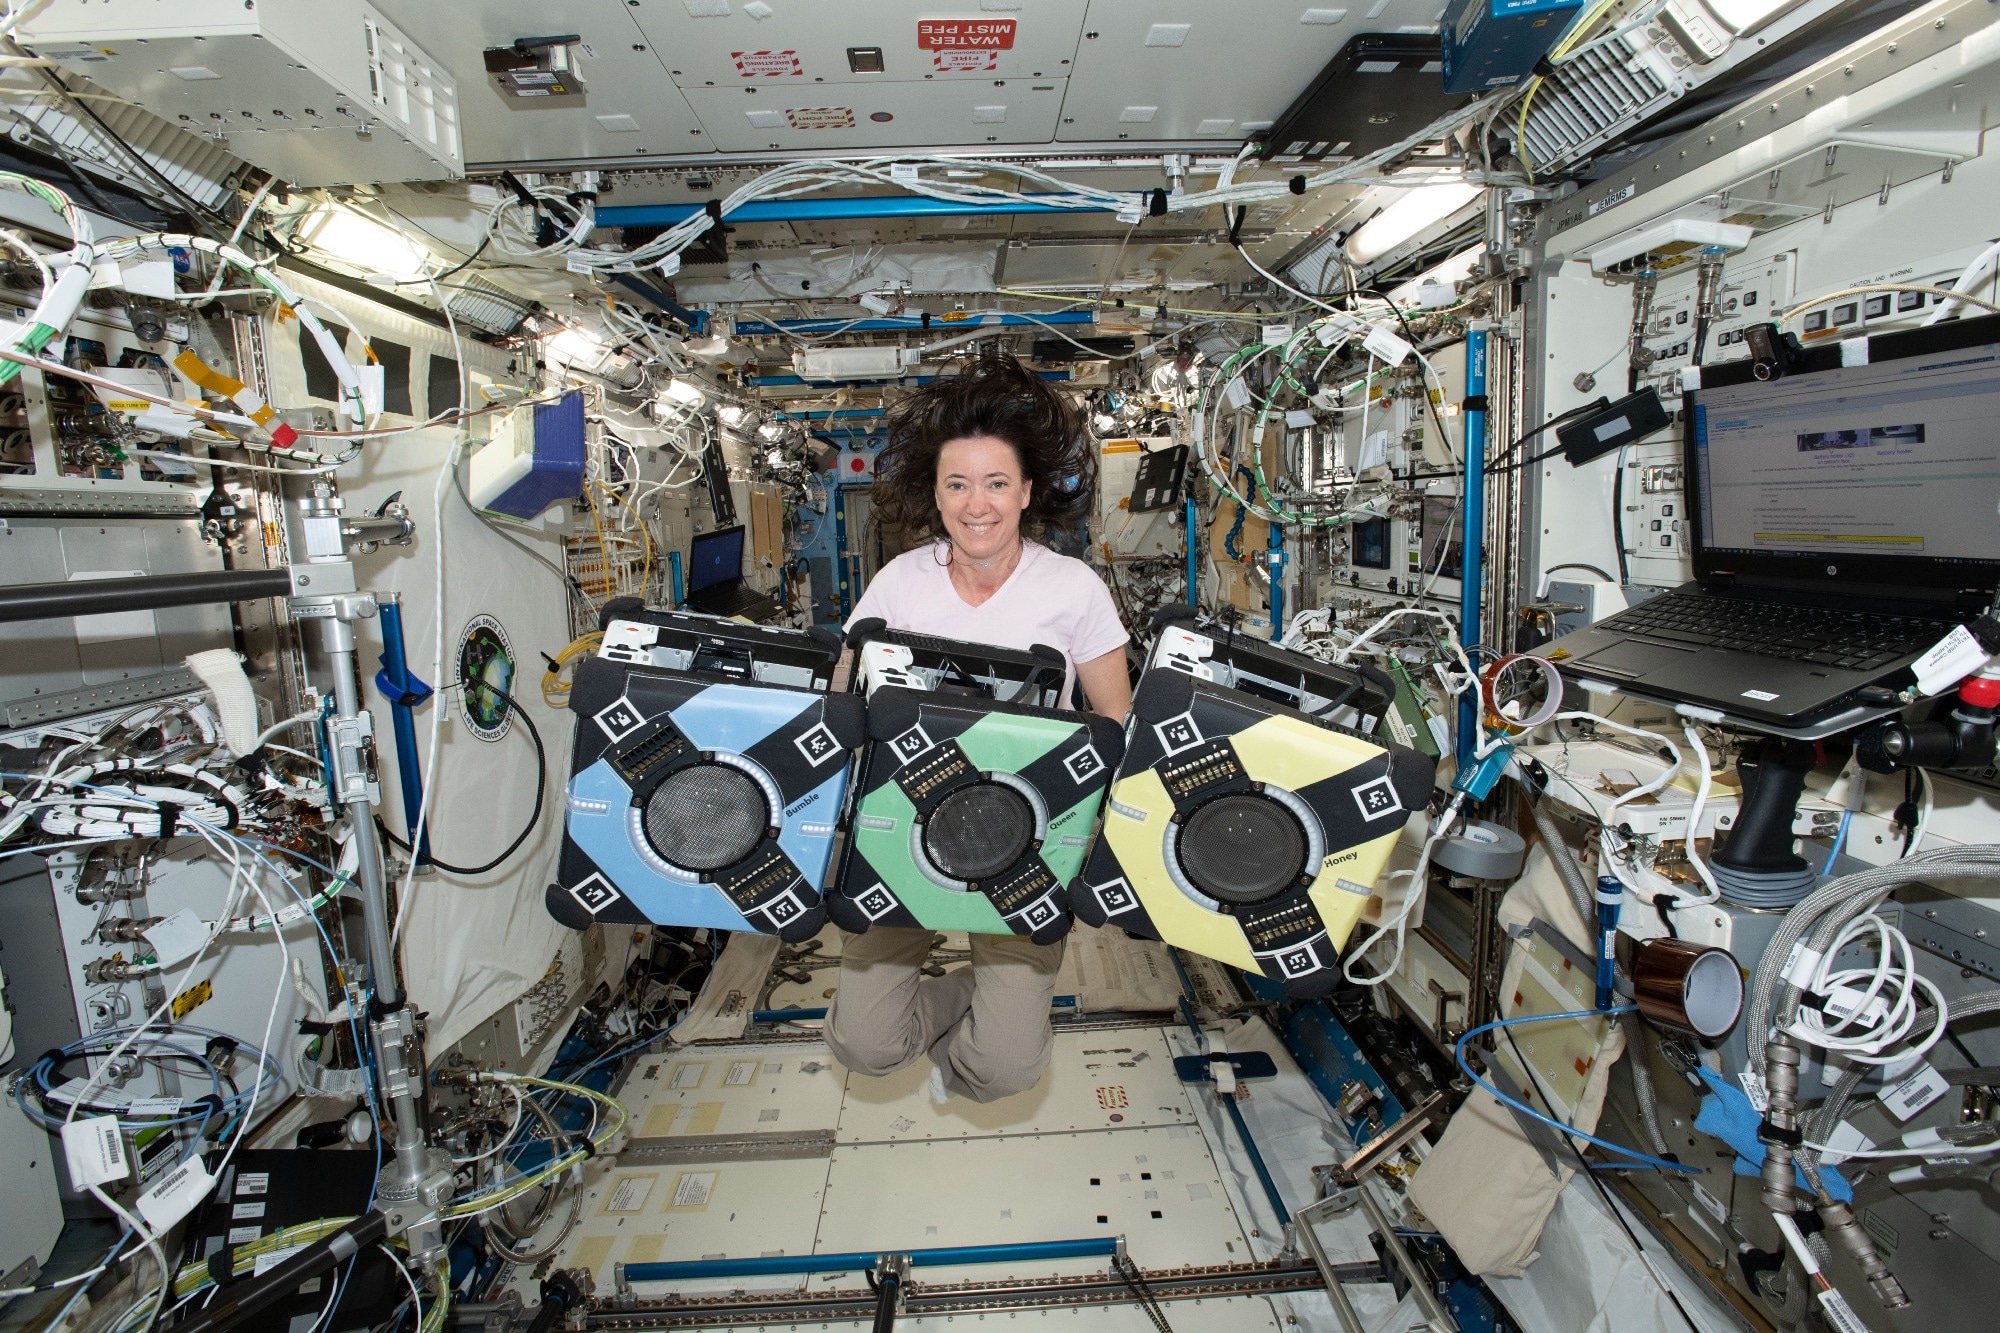 New technology tested by robotic helpers on the space station